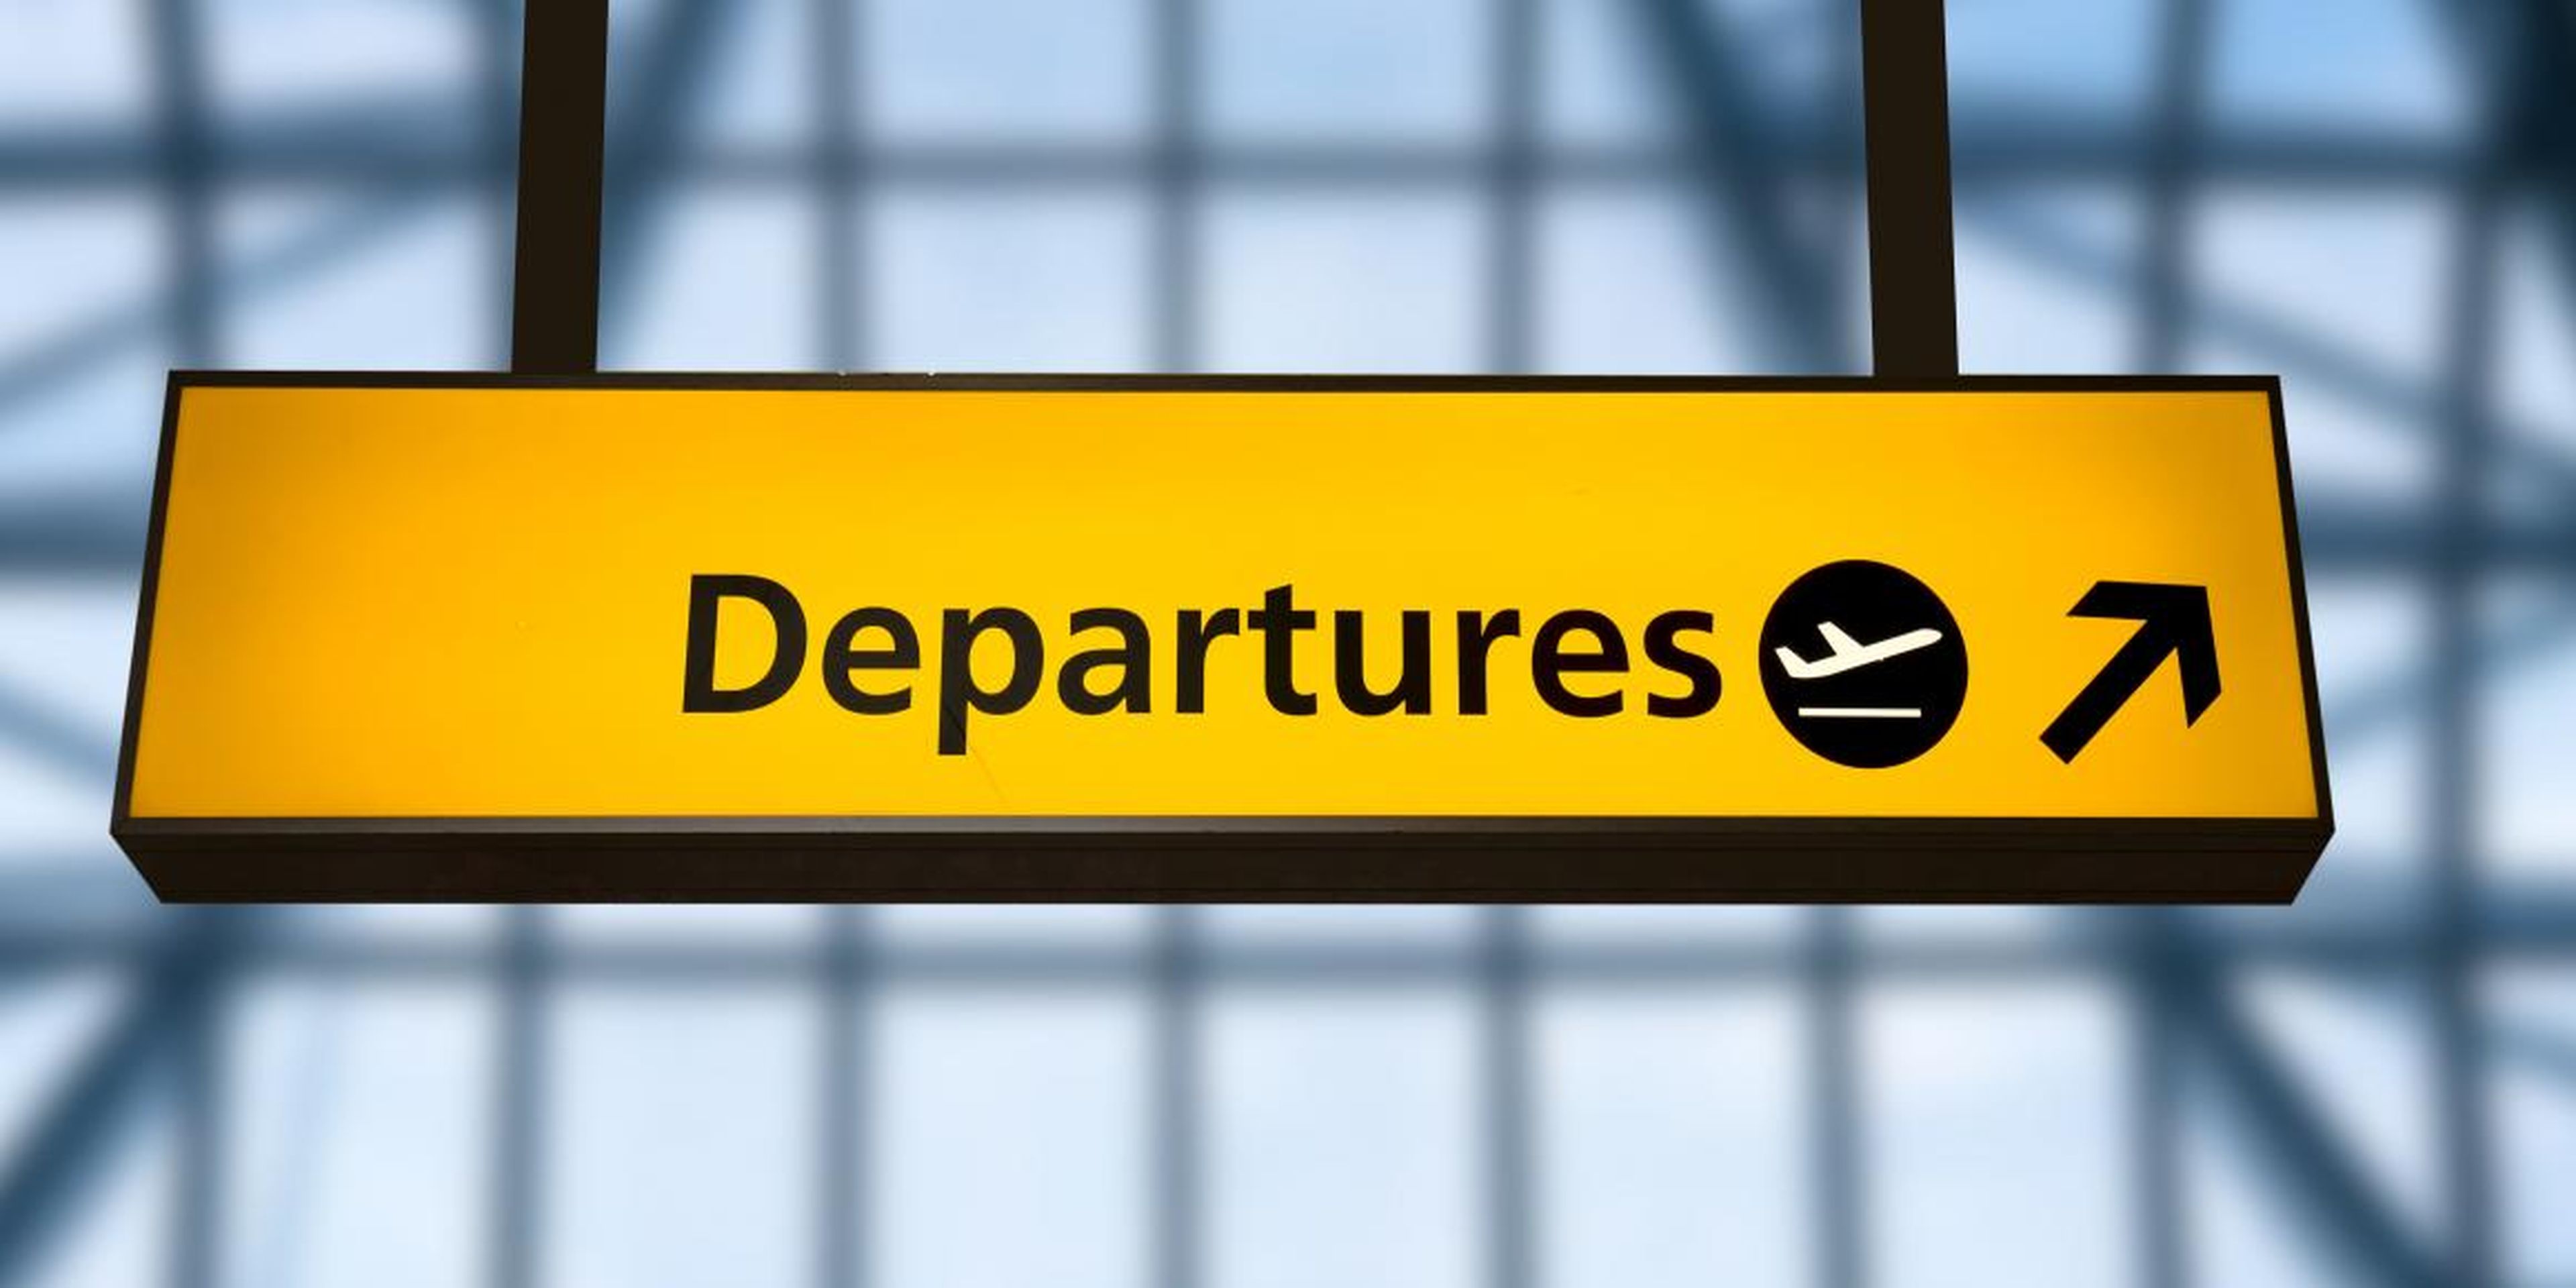 A sign for departures at Gatwick Airport, UK.